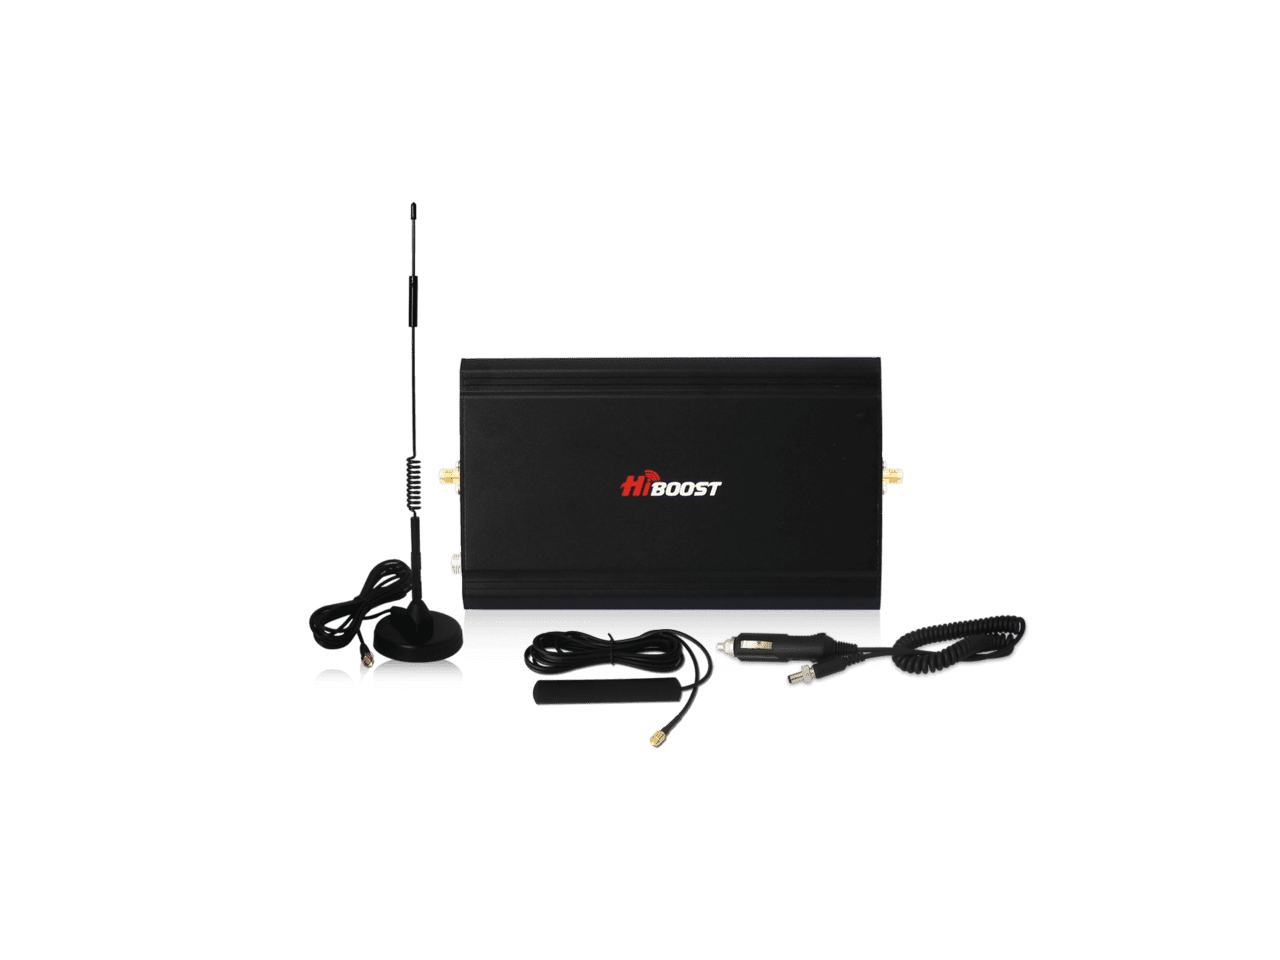 Hiboost C27G-5S Signal Booster Kit, Easy Vehicle 4G Cell Phone